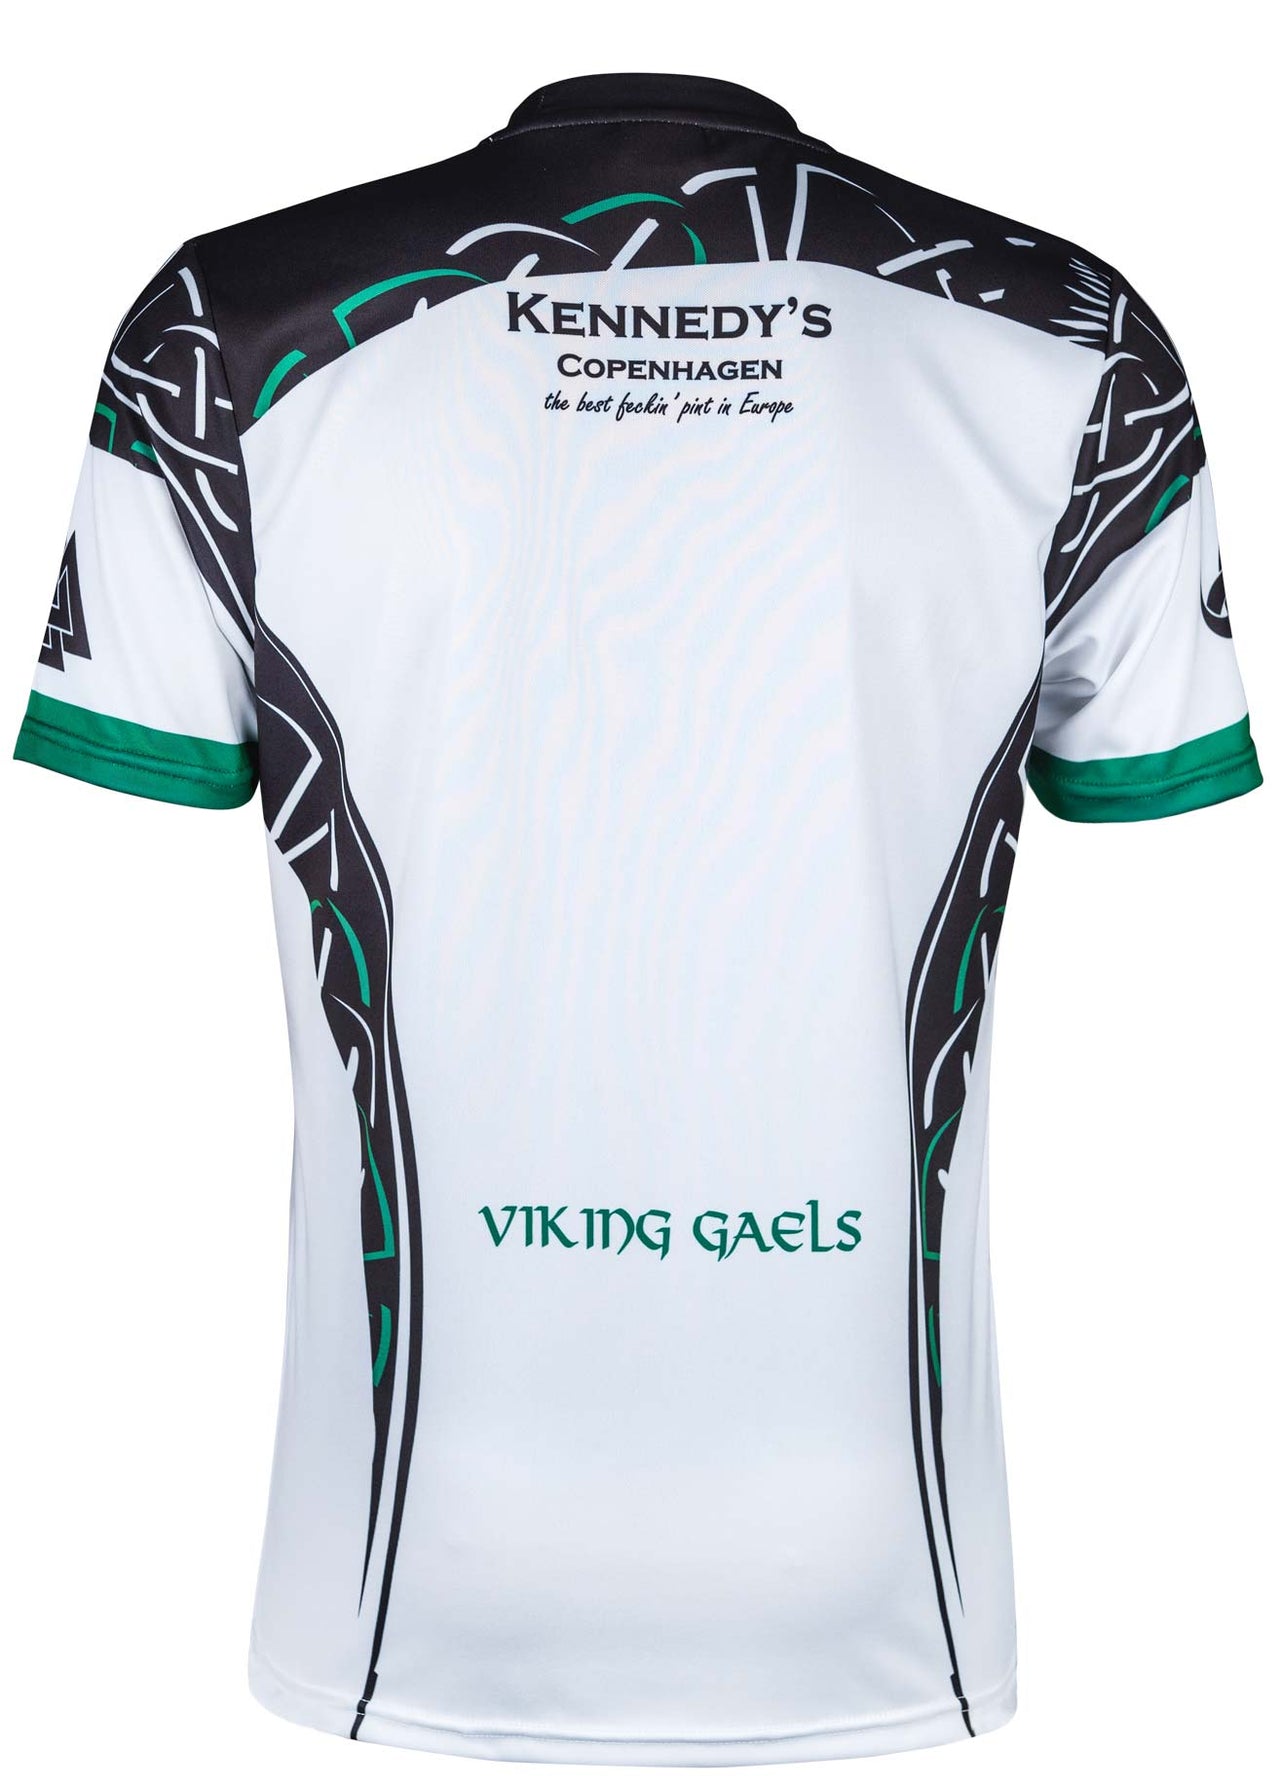 New Viking Gaels Home Jersey Regular Fit Adult